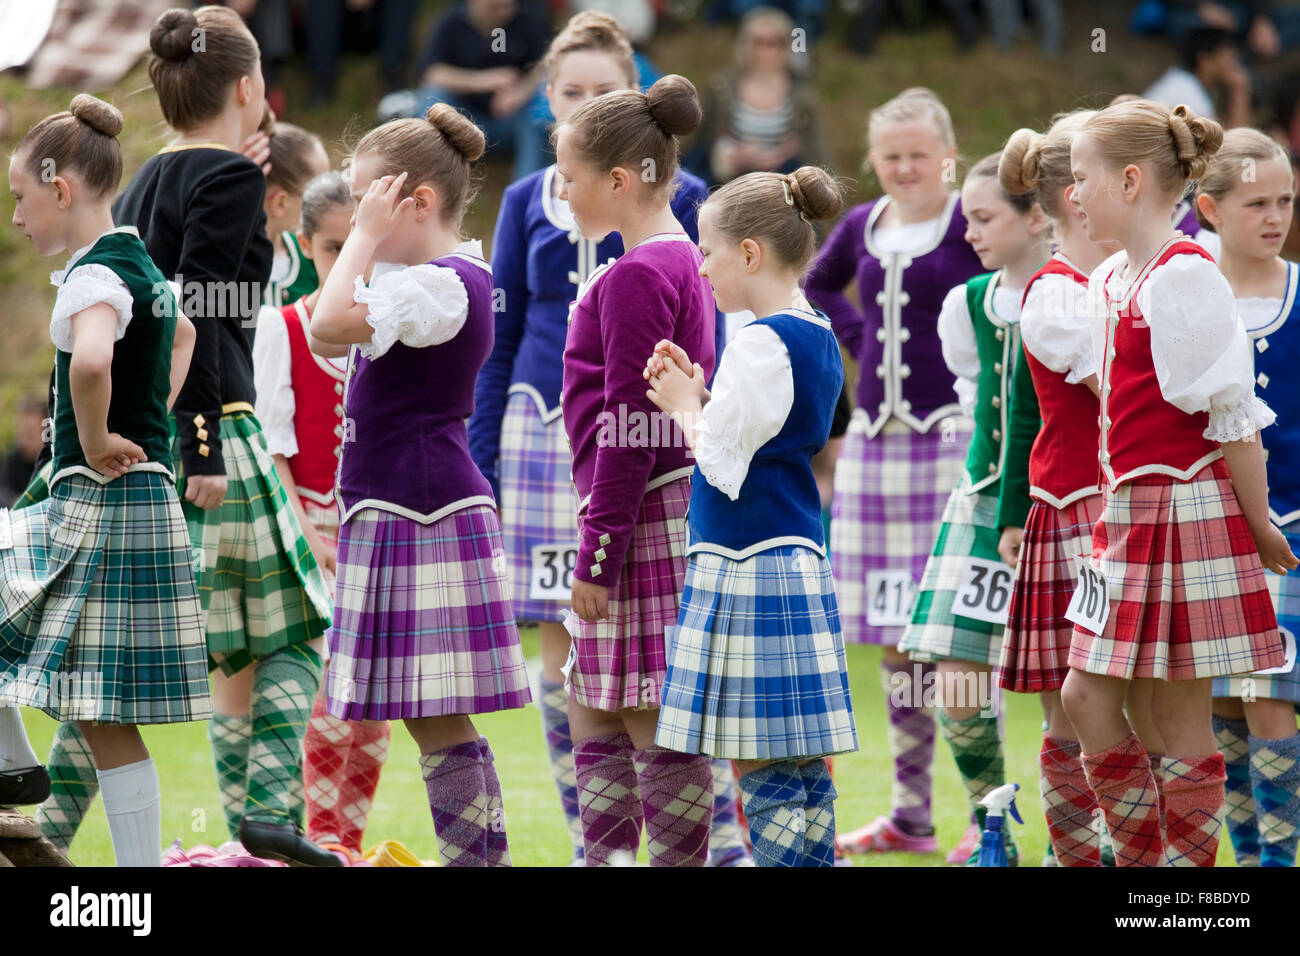 Cupar, Scotland - June 29th, 2013: A group of contestants for the Highland Dancing events at Ceres Highland Games. Stock Photo